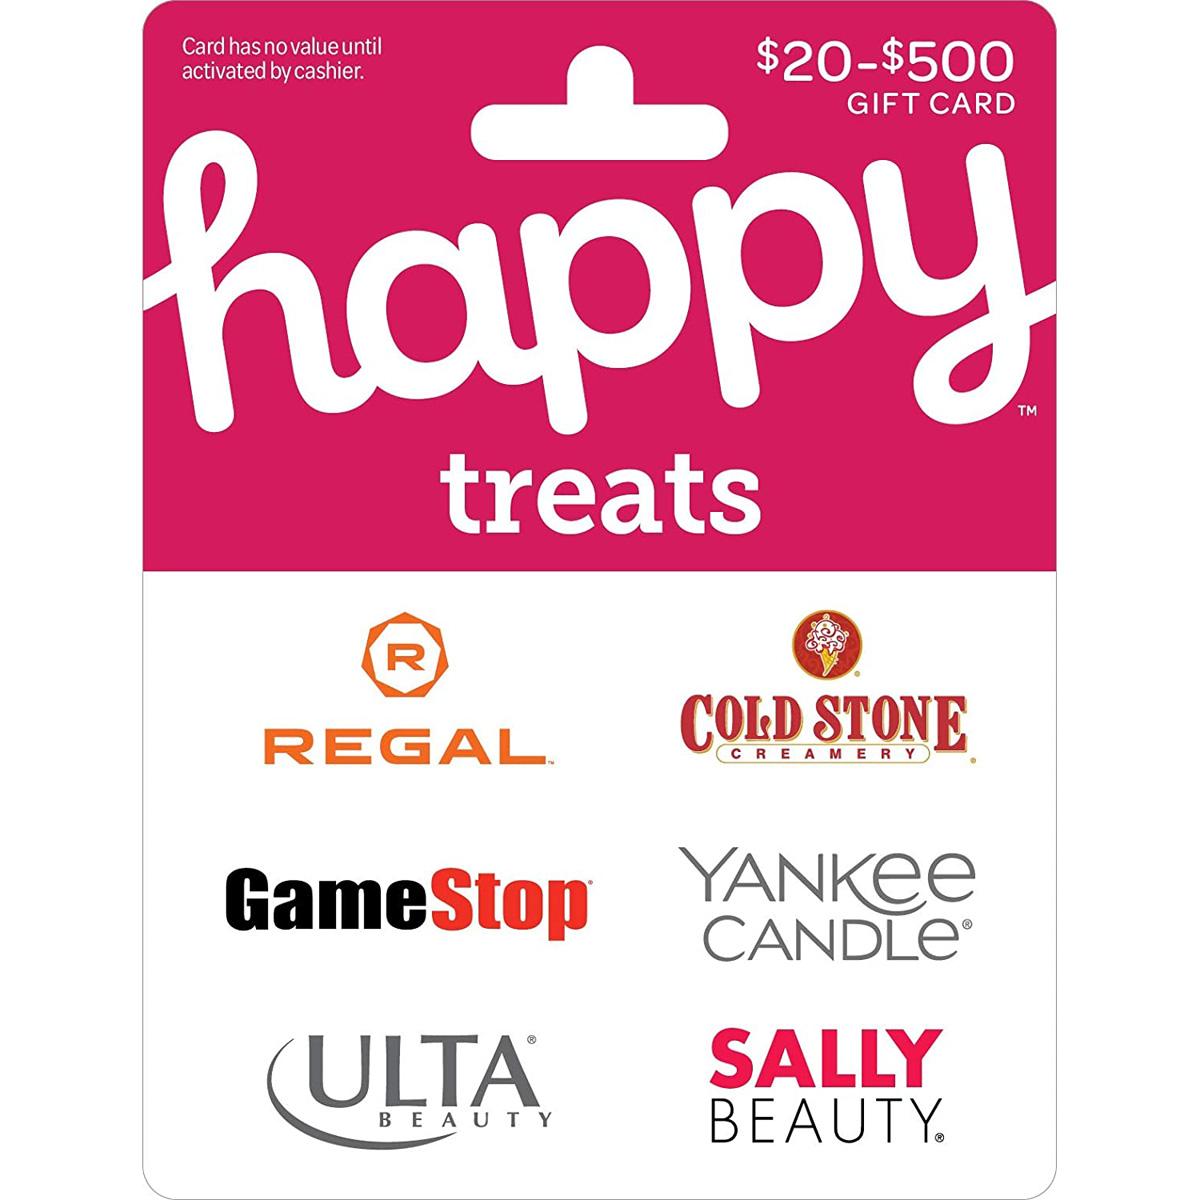 $50 Cold Stone Ulta GameStop Gift Cards for $42.50 Shipped